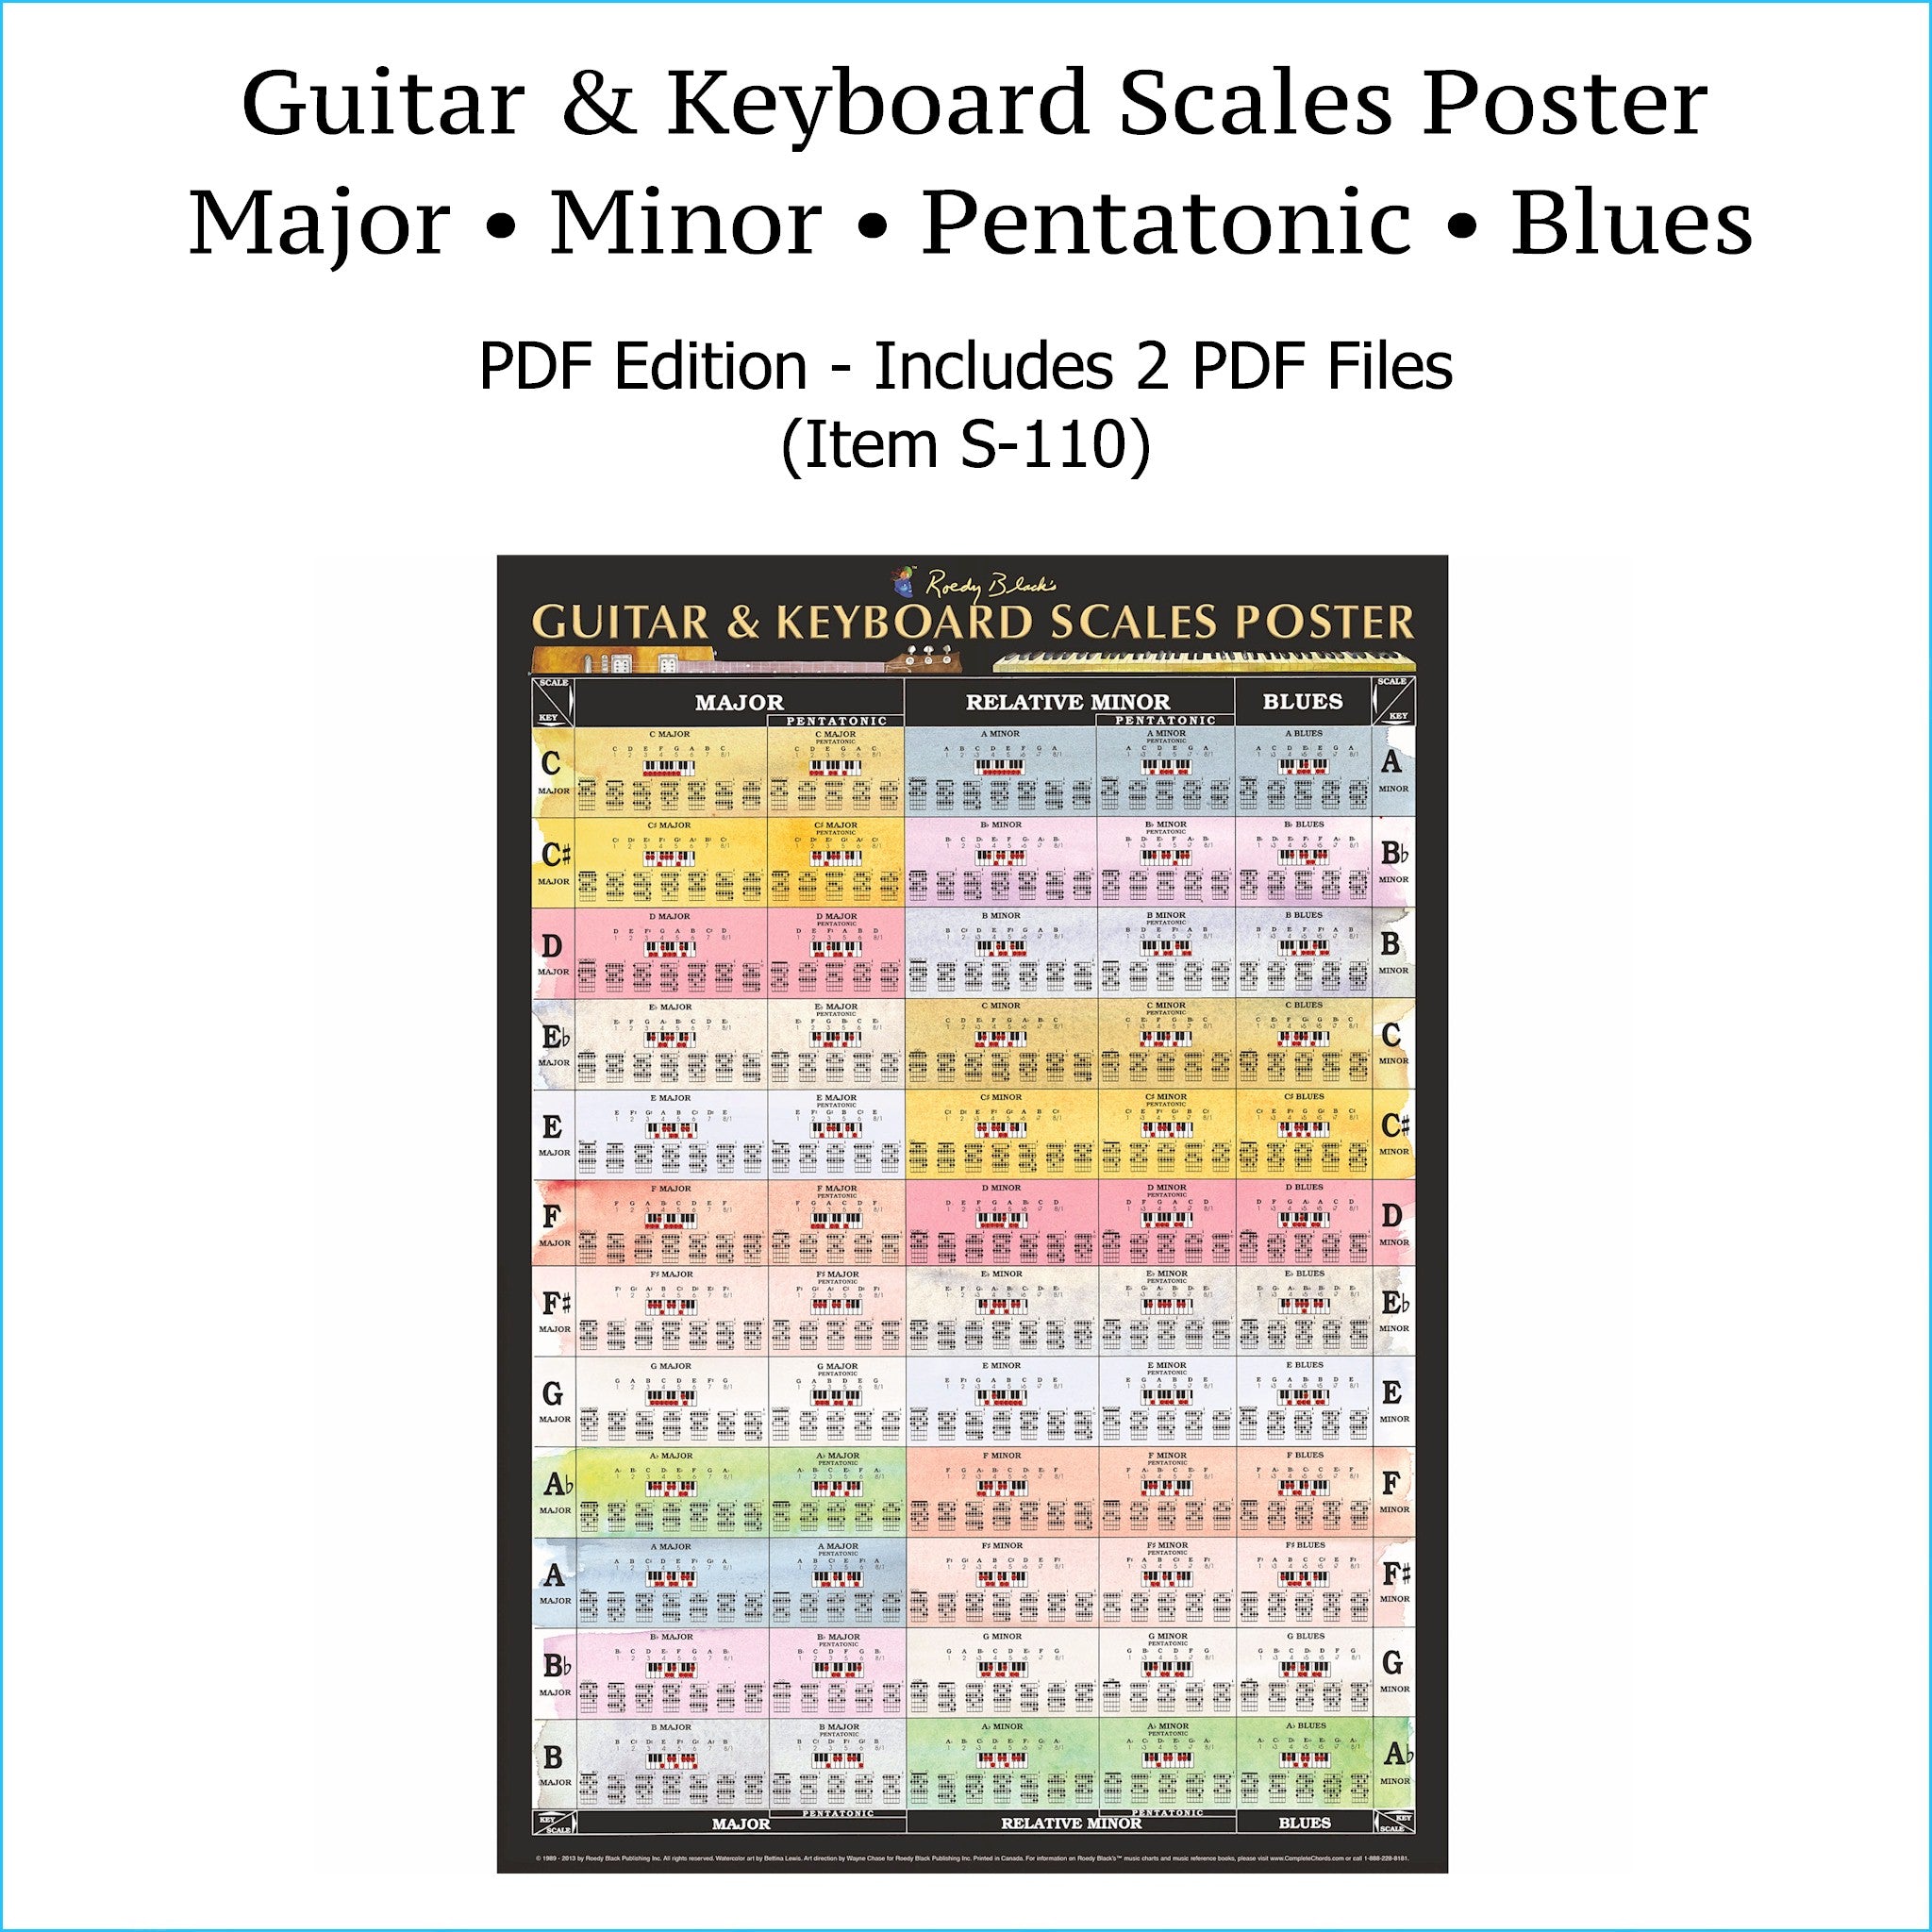 B Flat Major Scale: Note Information And Scale Diagrams For Guitarists